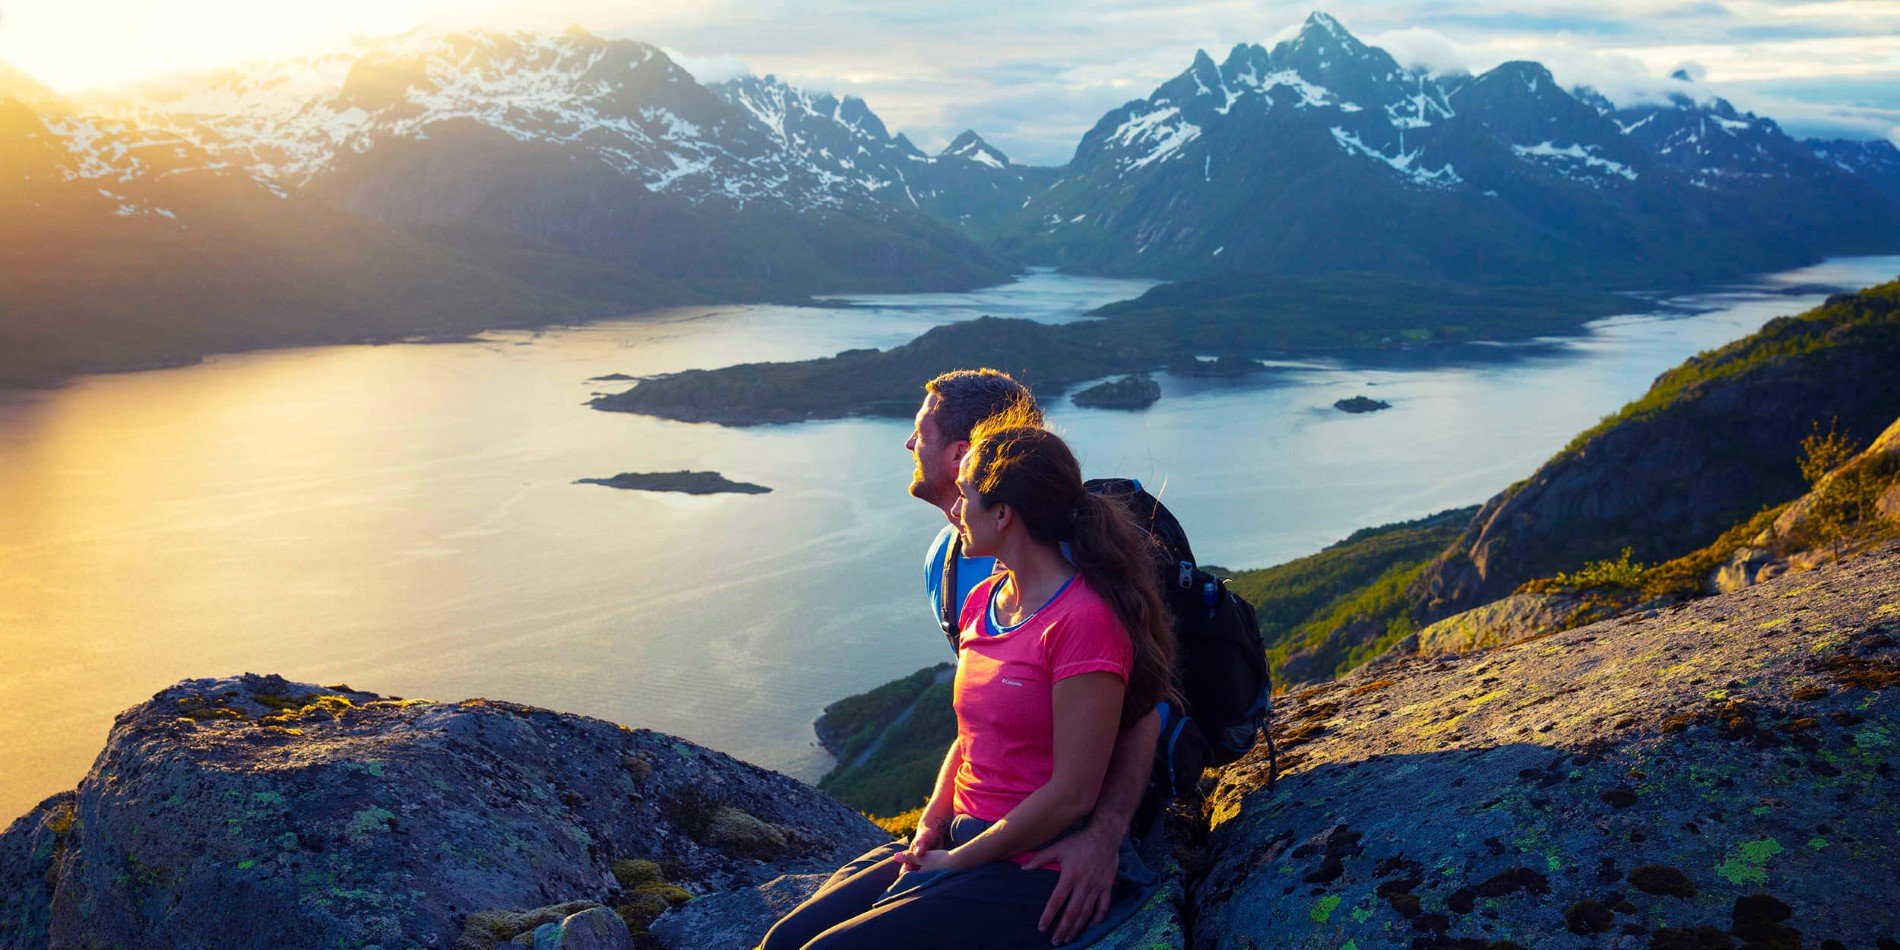 Lofoten's jagged mountain tops are perfect for great hikes and stunning views of Norway's landscape